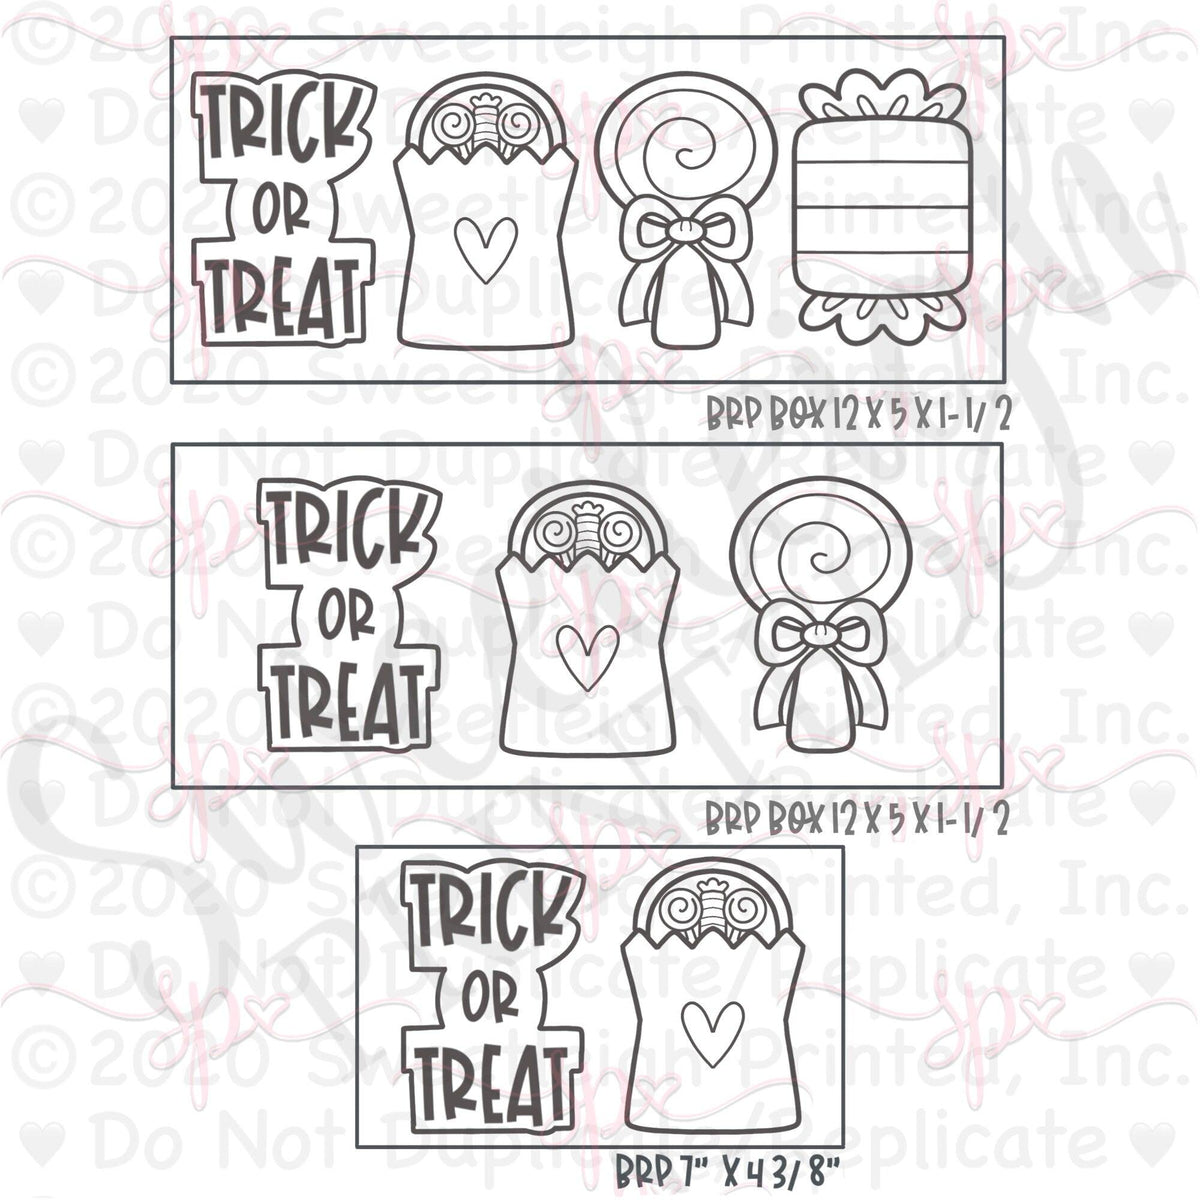 Trick or Treat Cookie Cutter Set - Sweetleigh 